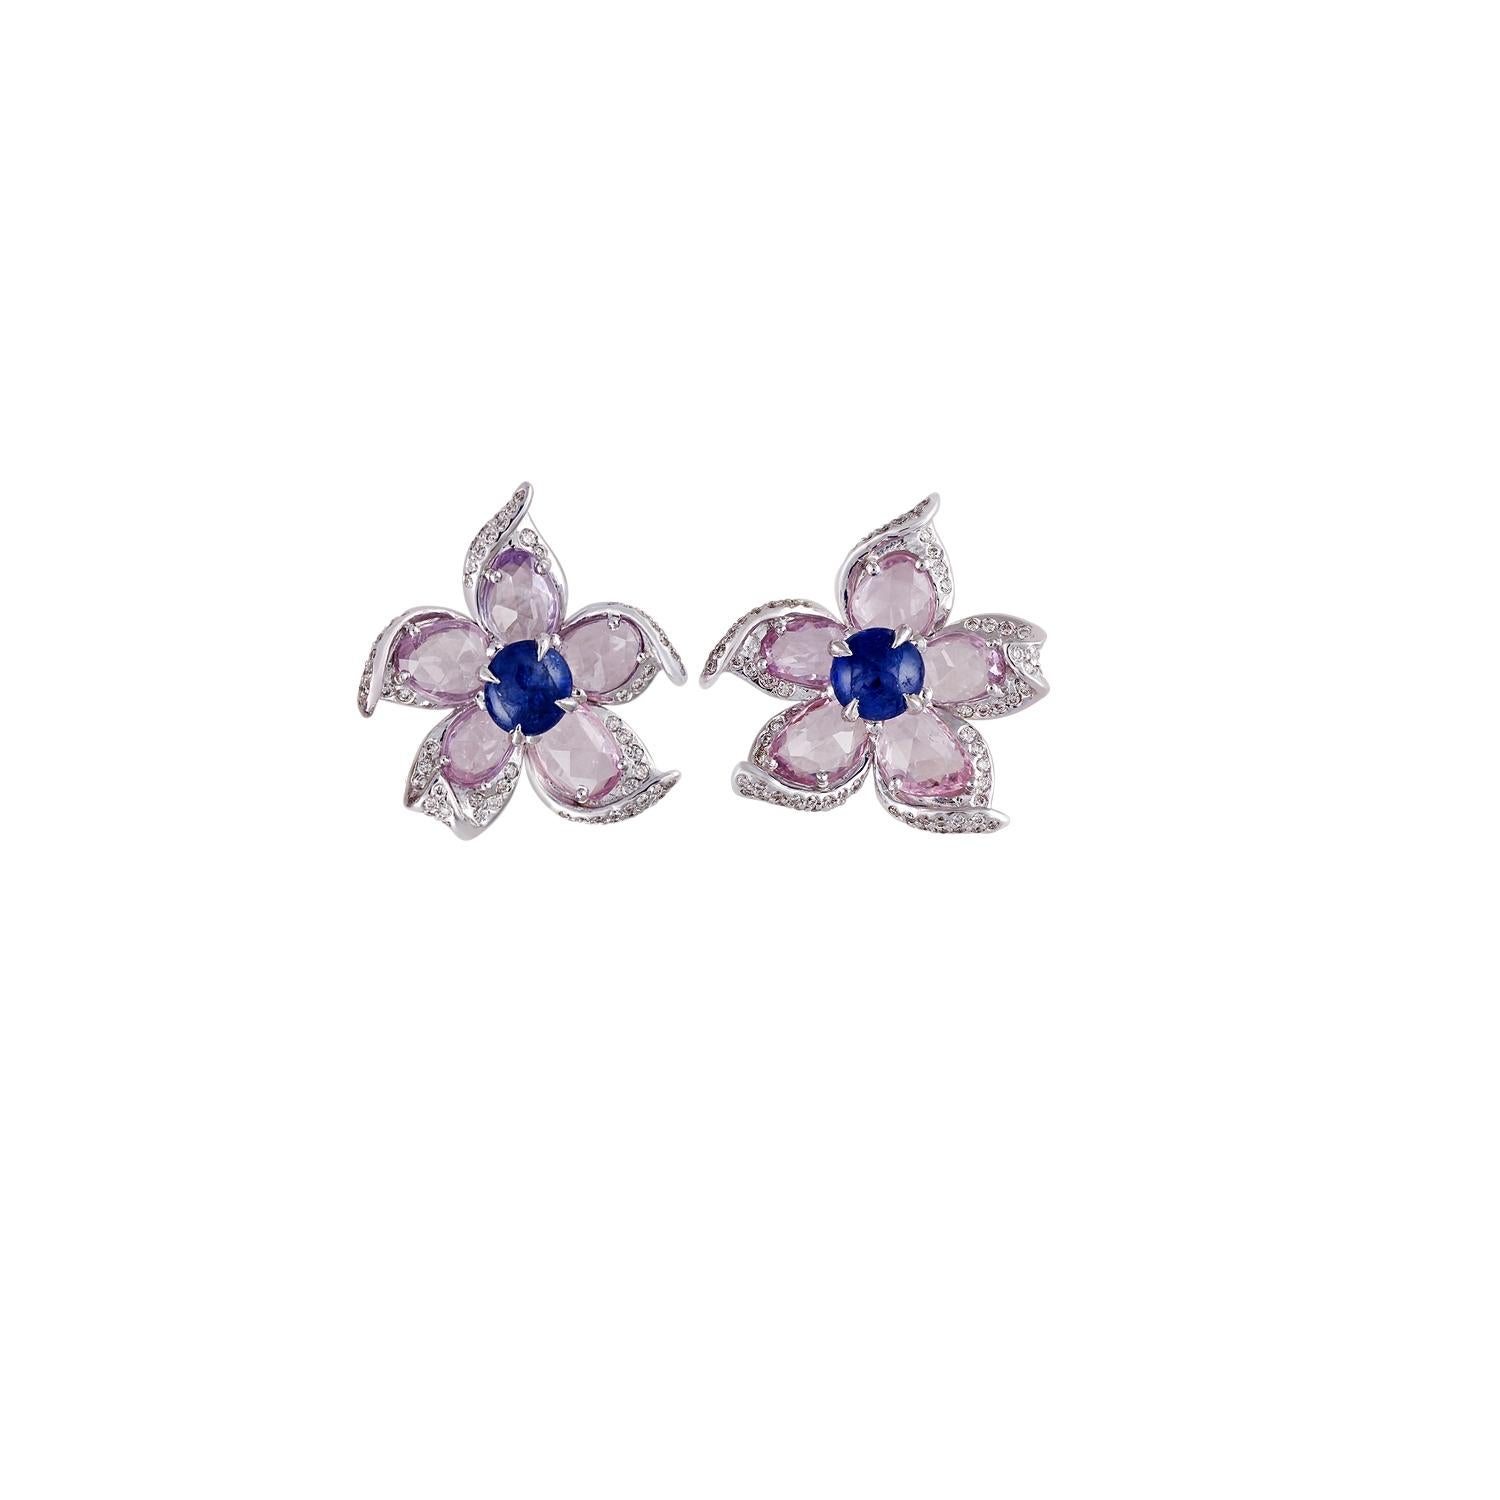 These are an exclusive pair of designer earrings features 2 pieces of cabochon shaped blue sapphires weight 1.77 carats, 10 pieces of rose cut pink sapphires weight 5.39 carats with round shaped diamonds weight 0.46 carat, this earring pair entirely